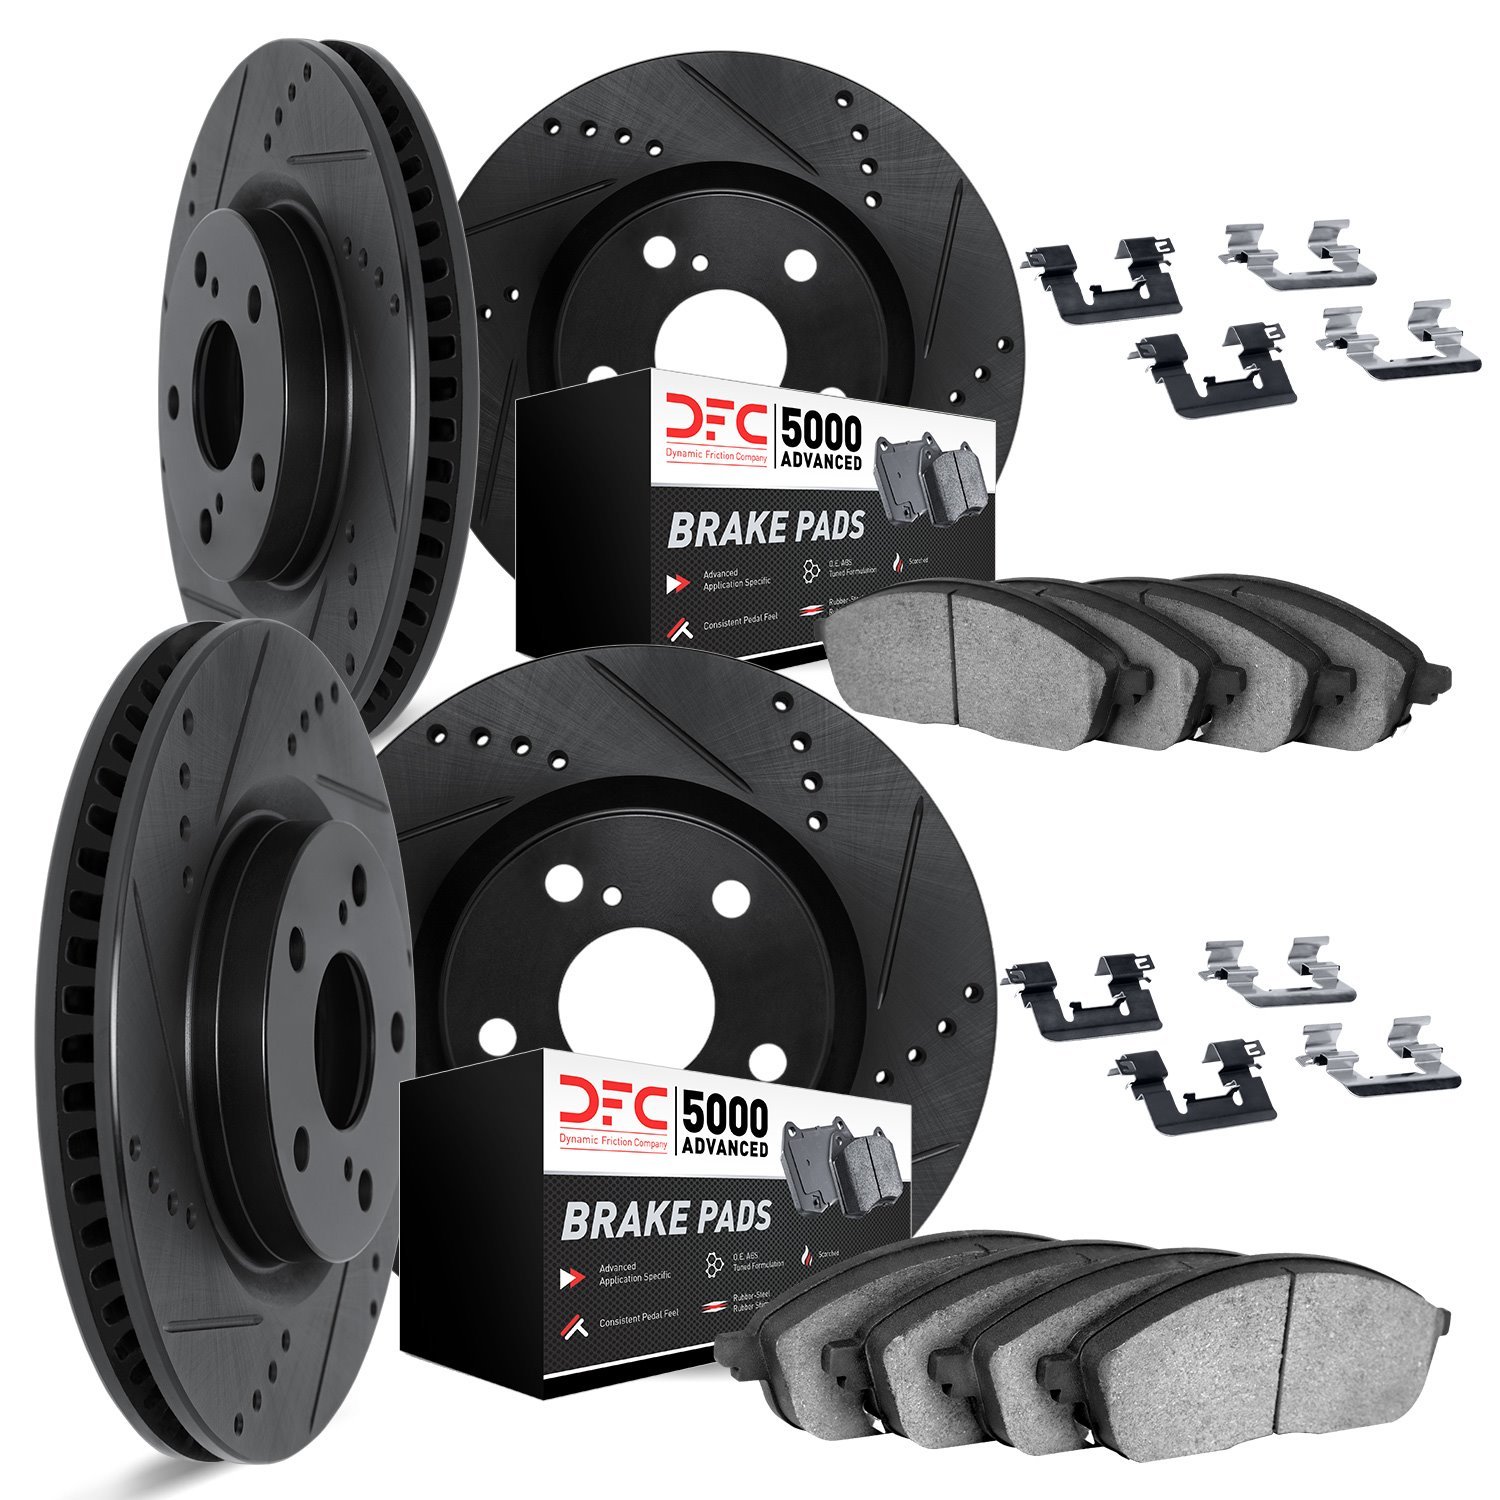 8514-31028 Drilled/Slotted Brake Rotors w/5000 Advanced Brake Pads Kit & Hardware [Black], 2012-2021 BMW, Position: Front and Re